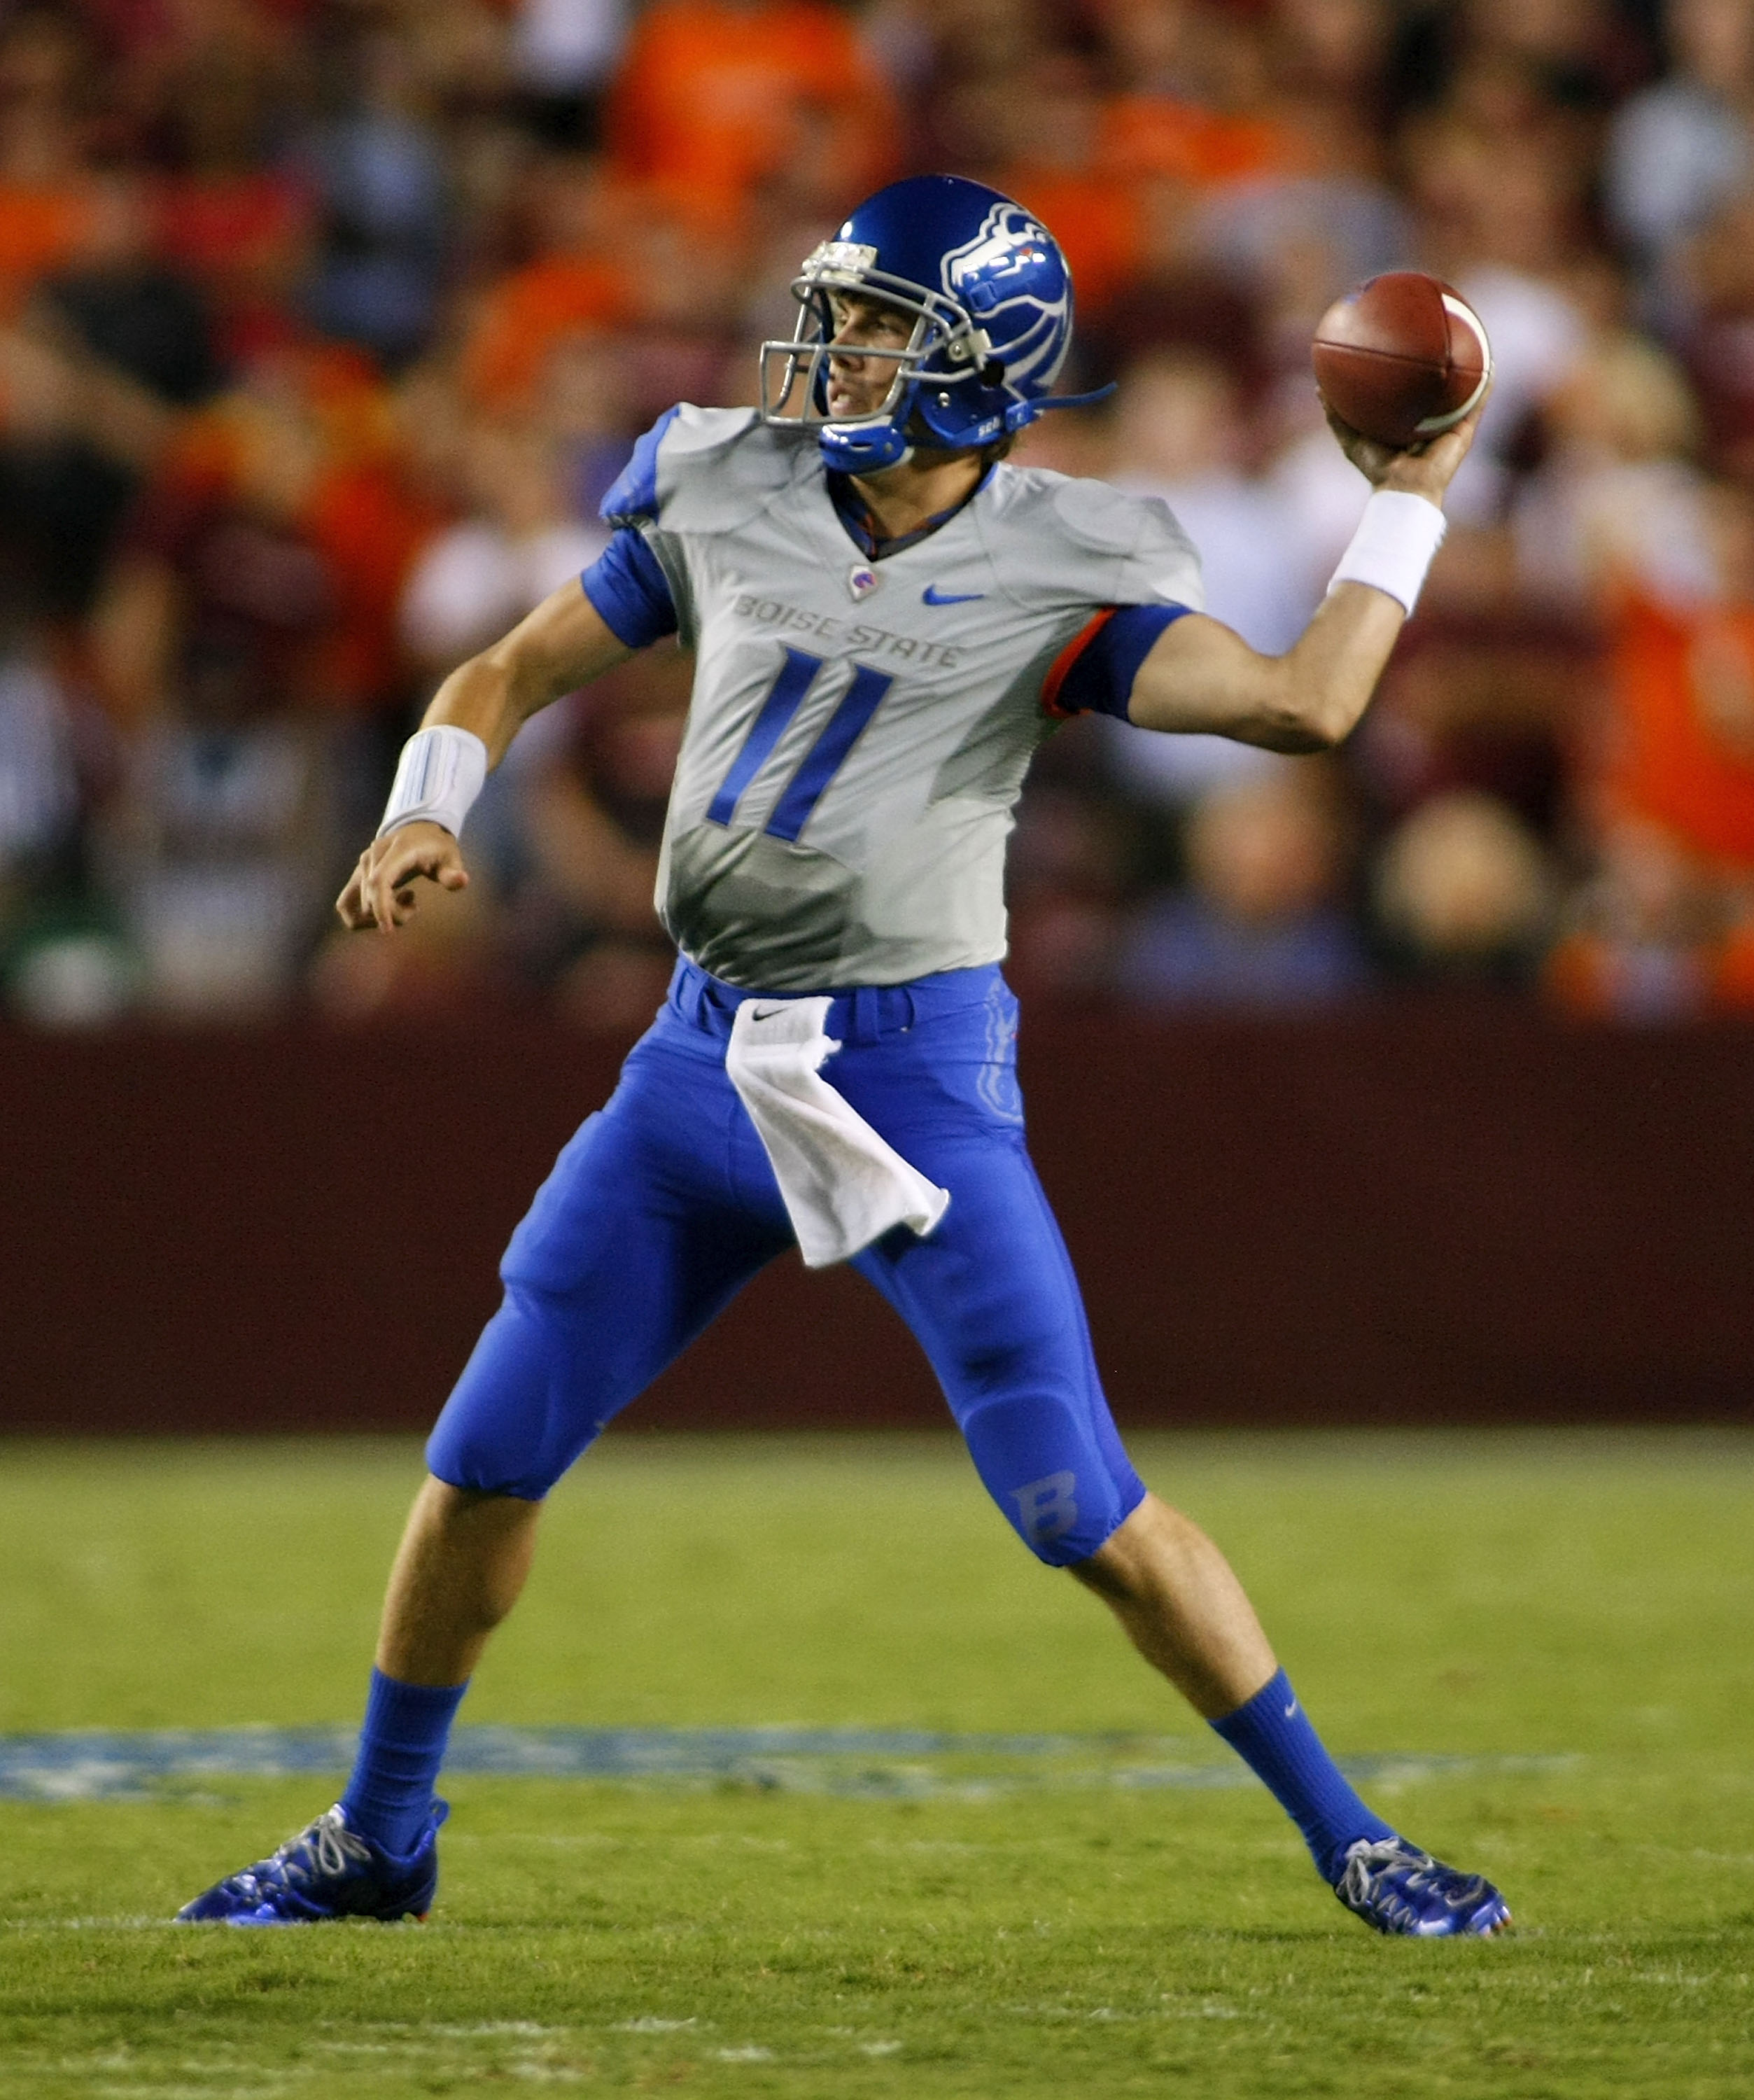 LANDOVER, MD - SEPTEMBER 06:  Quarterback Kellen Moore #11 of the Boise State Broncos passes against the Virginia Tech Hokies at FedExField on September 6, 2010 in Landover, Maryland.  (Photo by Geoff Burke/Getty Images)